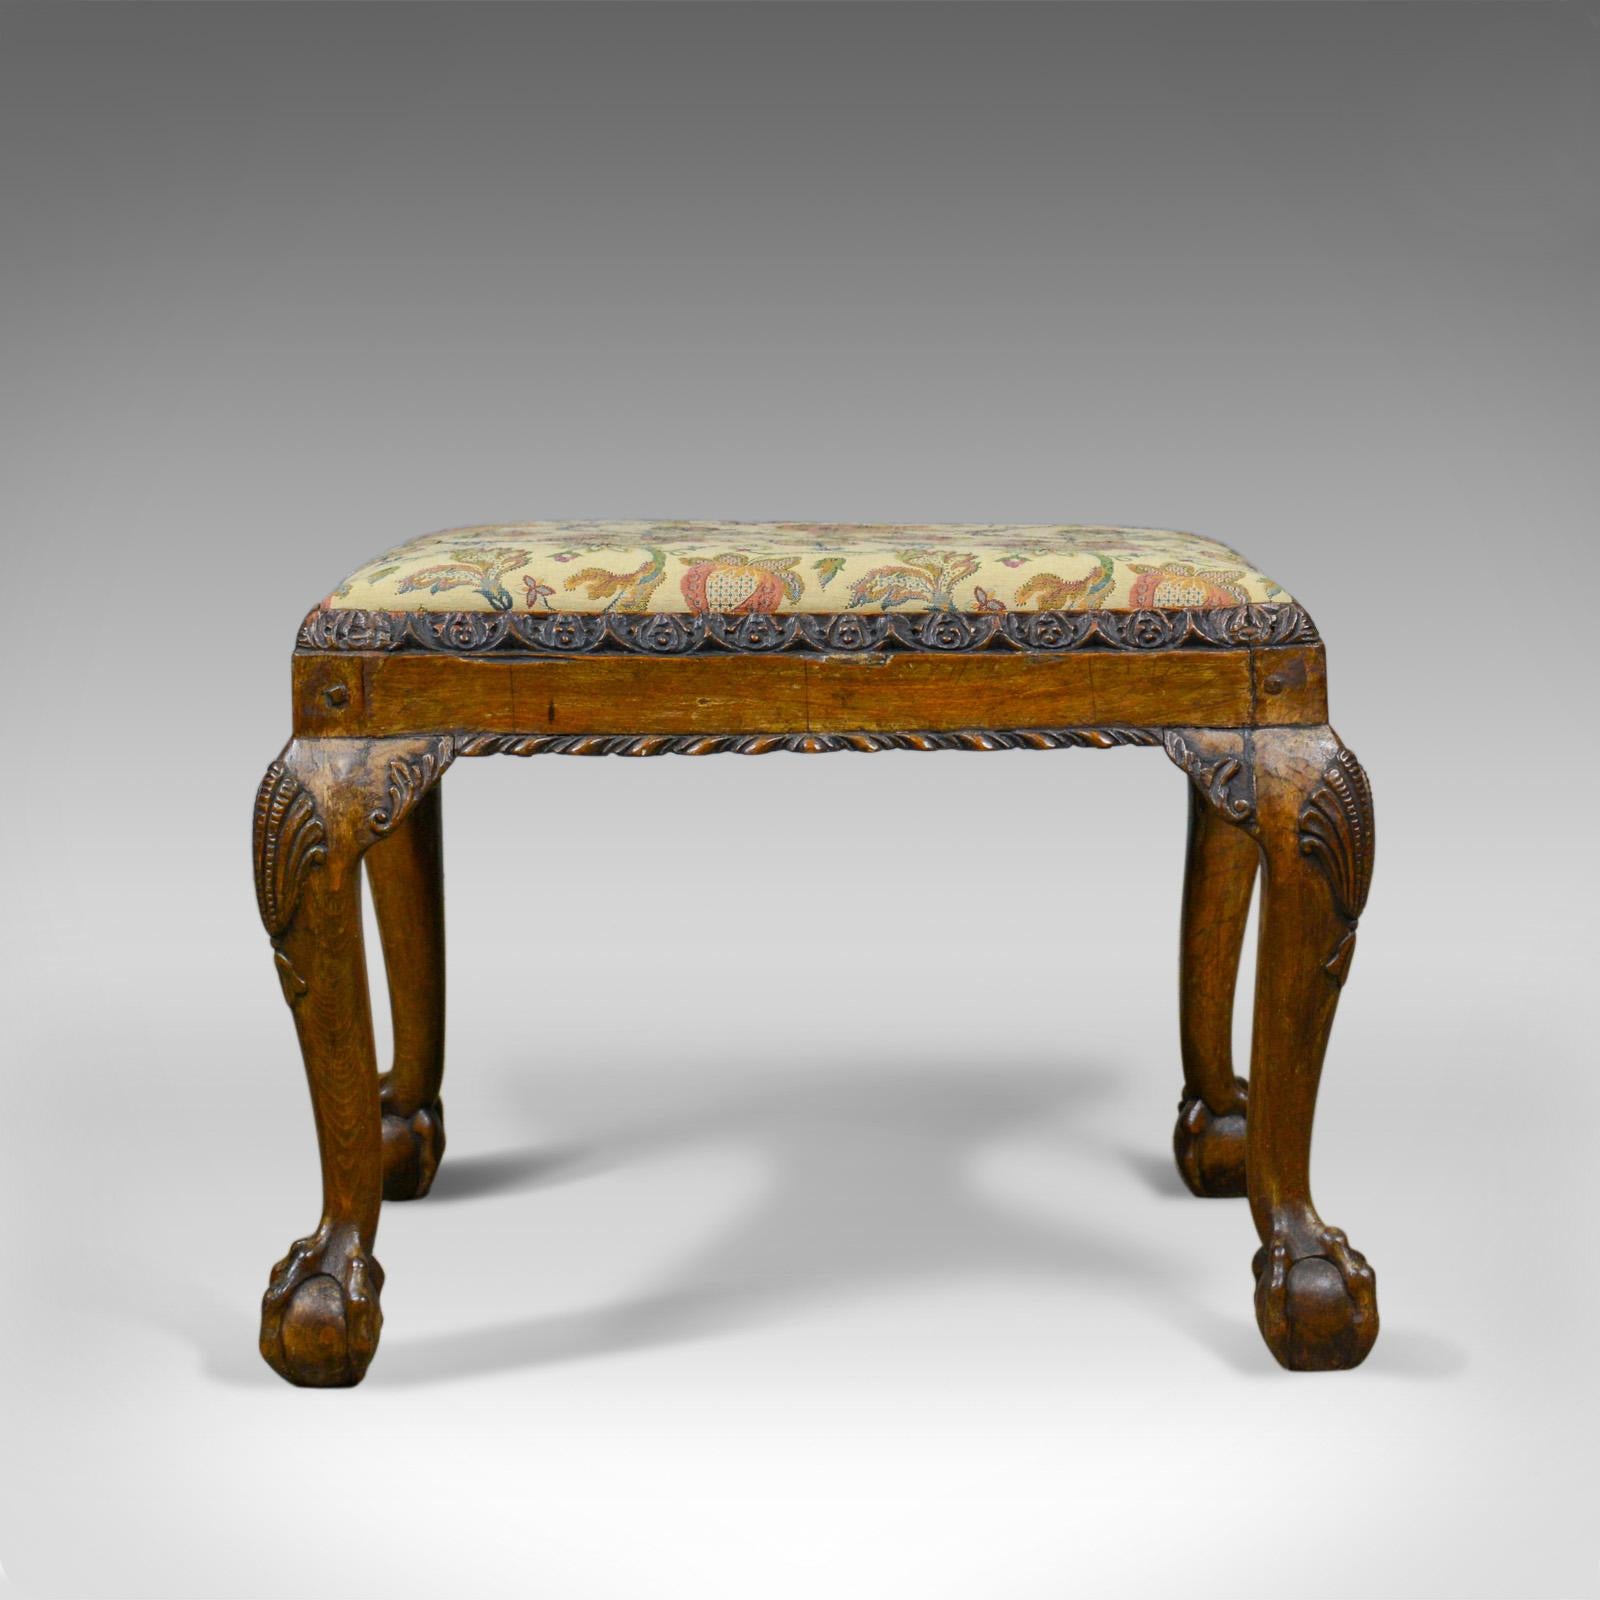 This is an antique foot stool in walnut with a needlepoint tapestry cloth. An English provincial stool dating to the Regency period of the early 19th century, circa 1820.

Deep, warm tones to the walnut frame
Desirable color and an aged